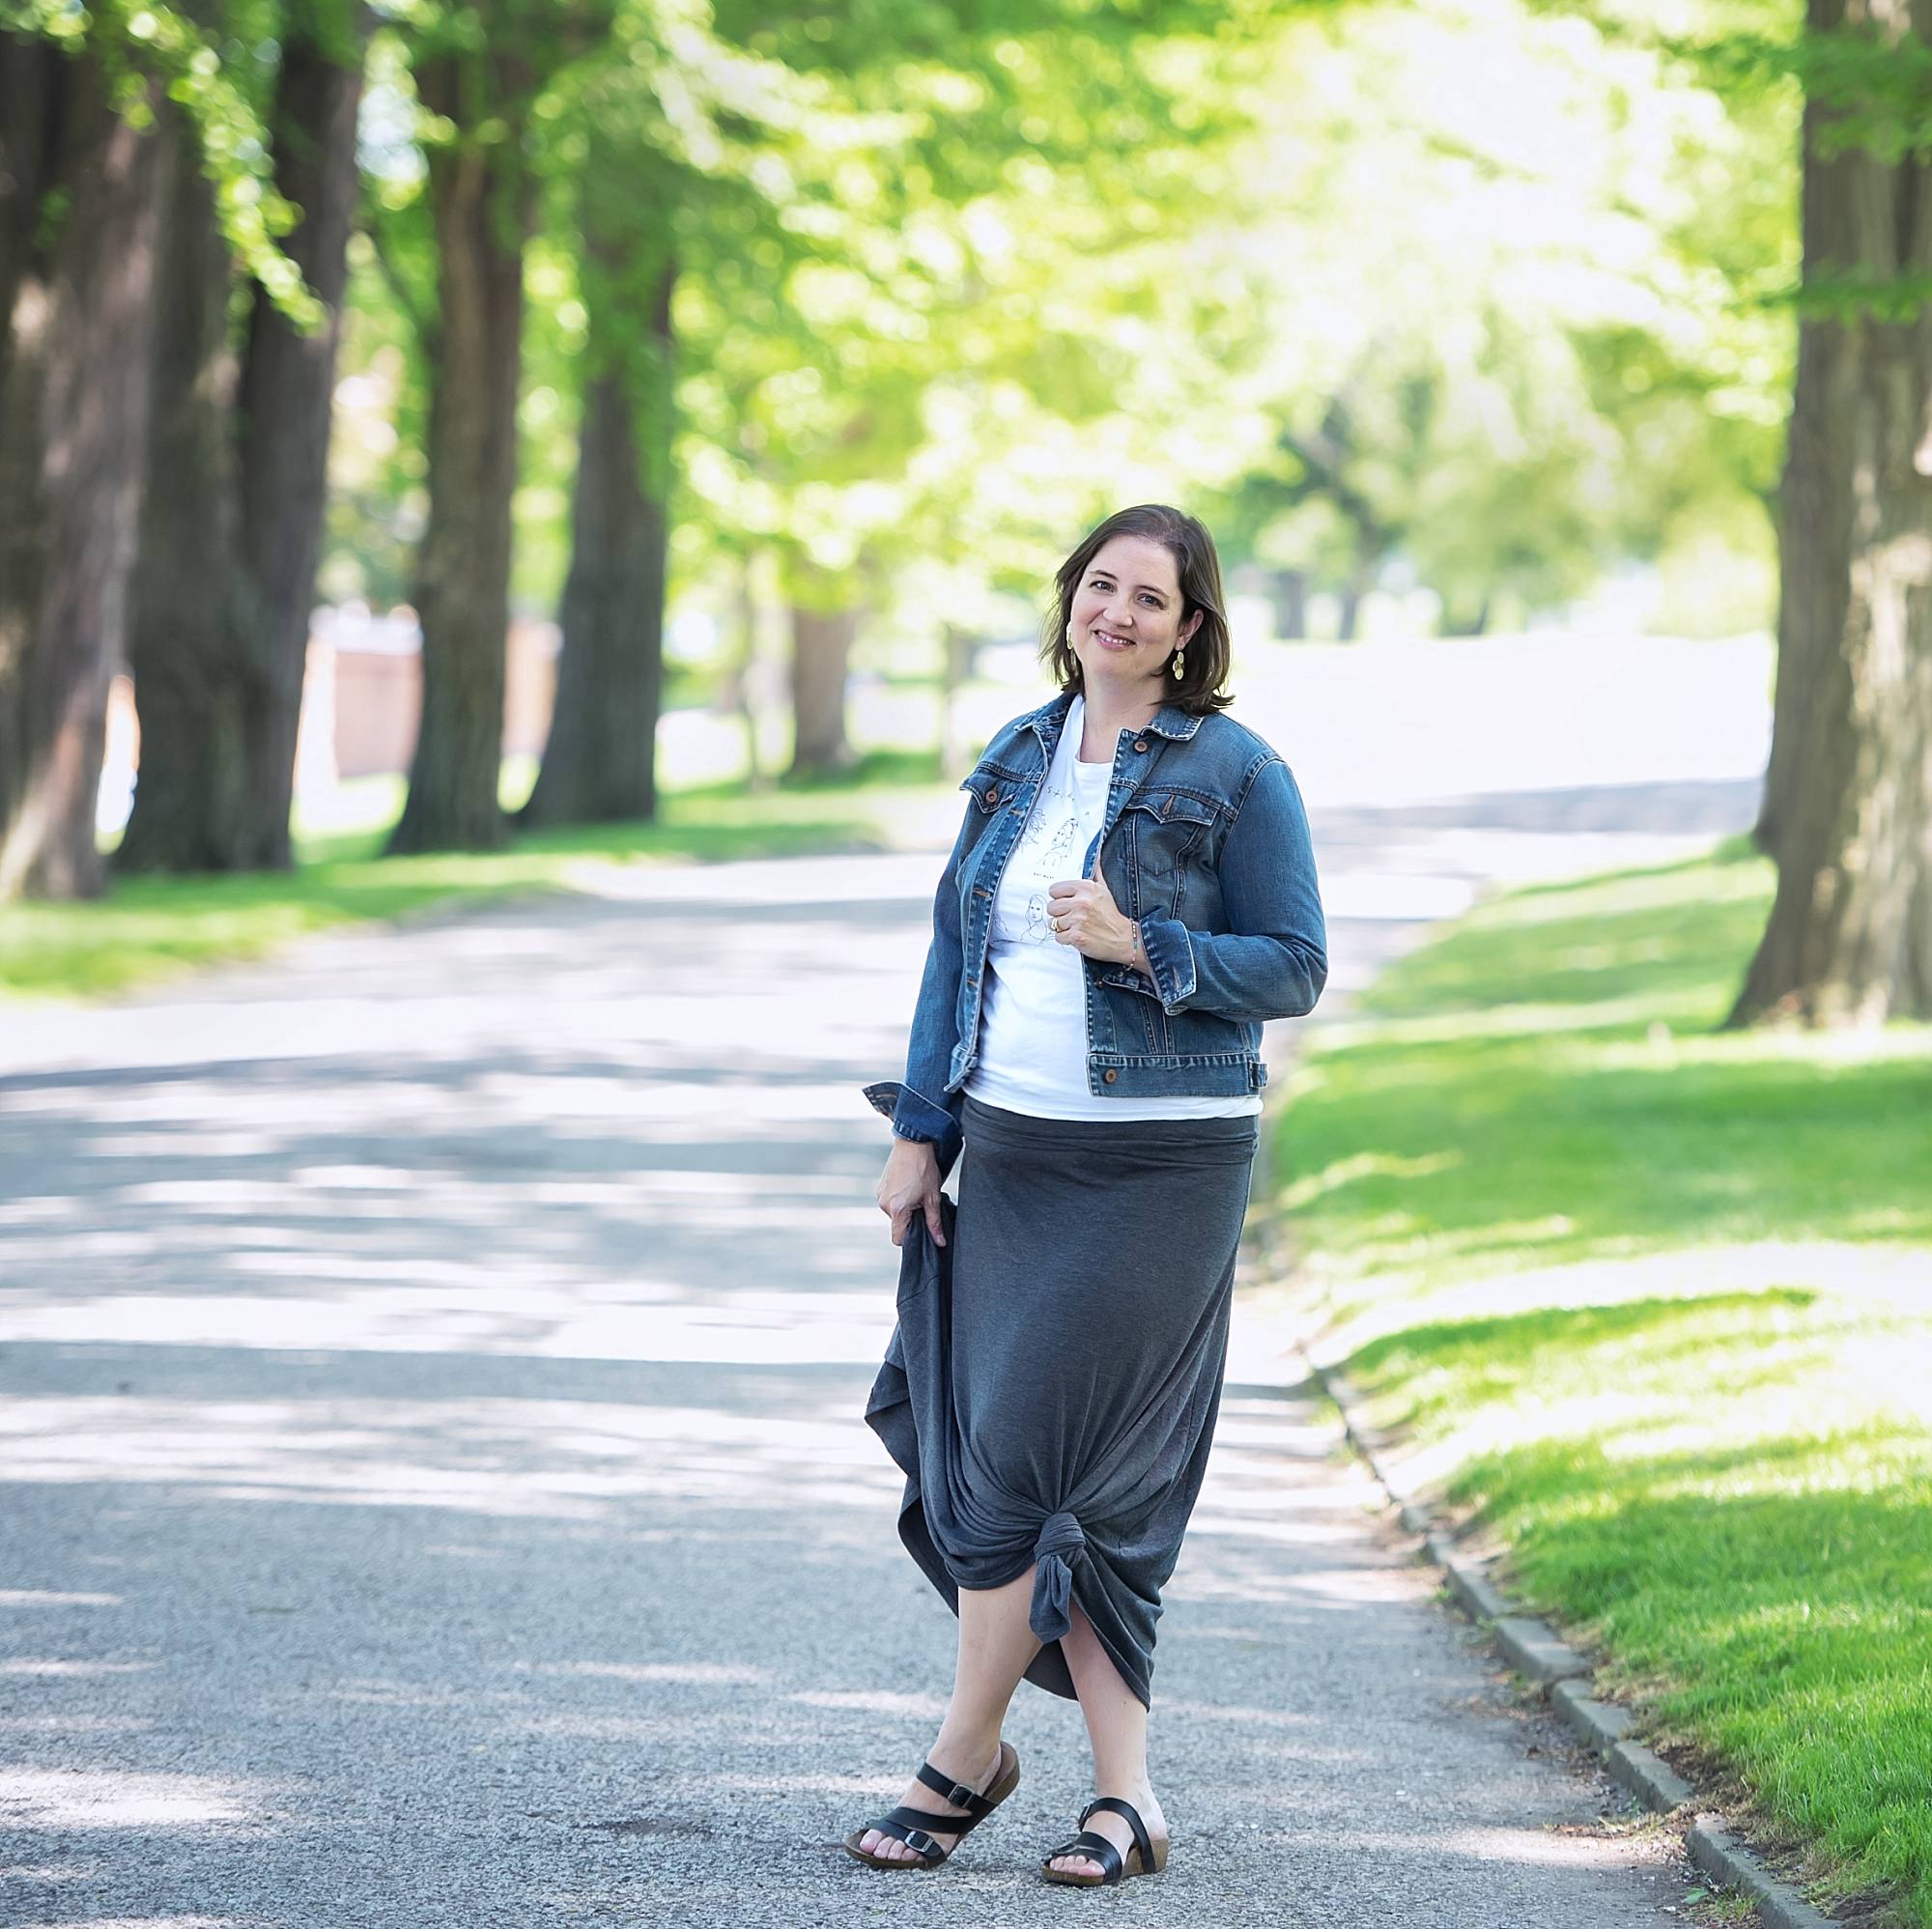 image of Jodi Walsh of Jodi Walsh Photography. She has short dark hair. She's wearing a denim jacket with a white shirt and long gray skirt. She's standing in a road through a park in Pittsburgh.